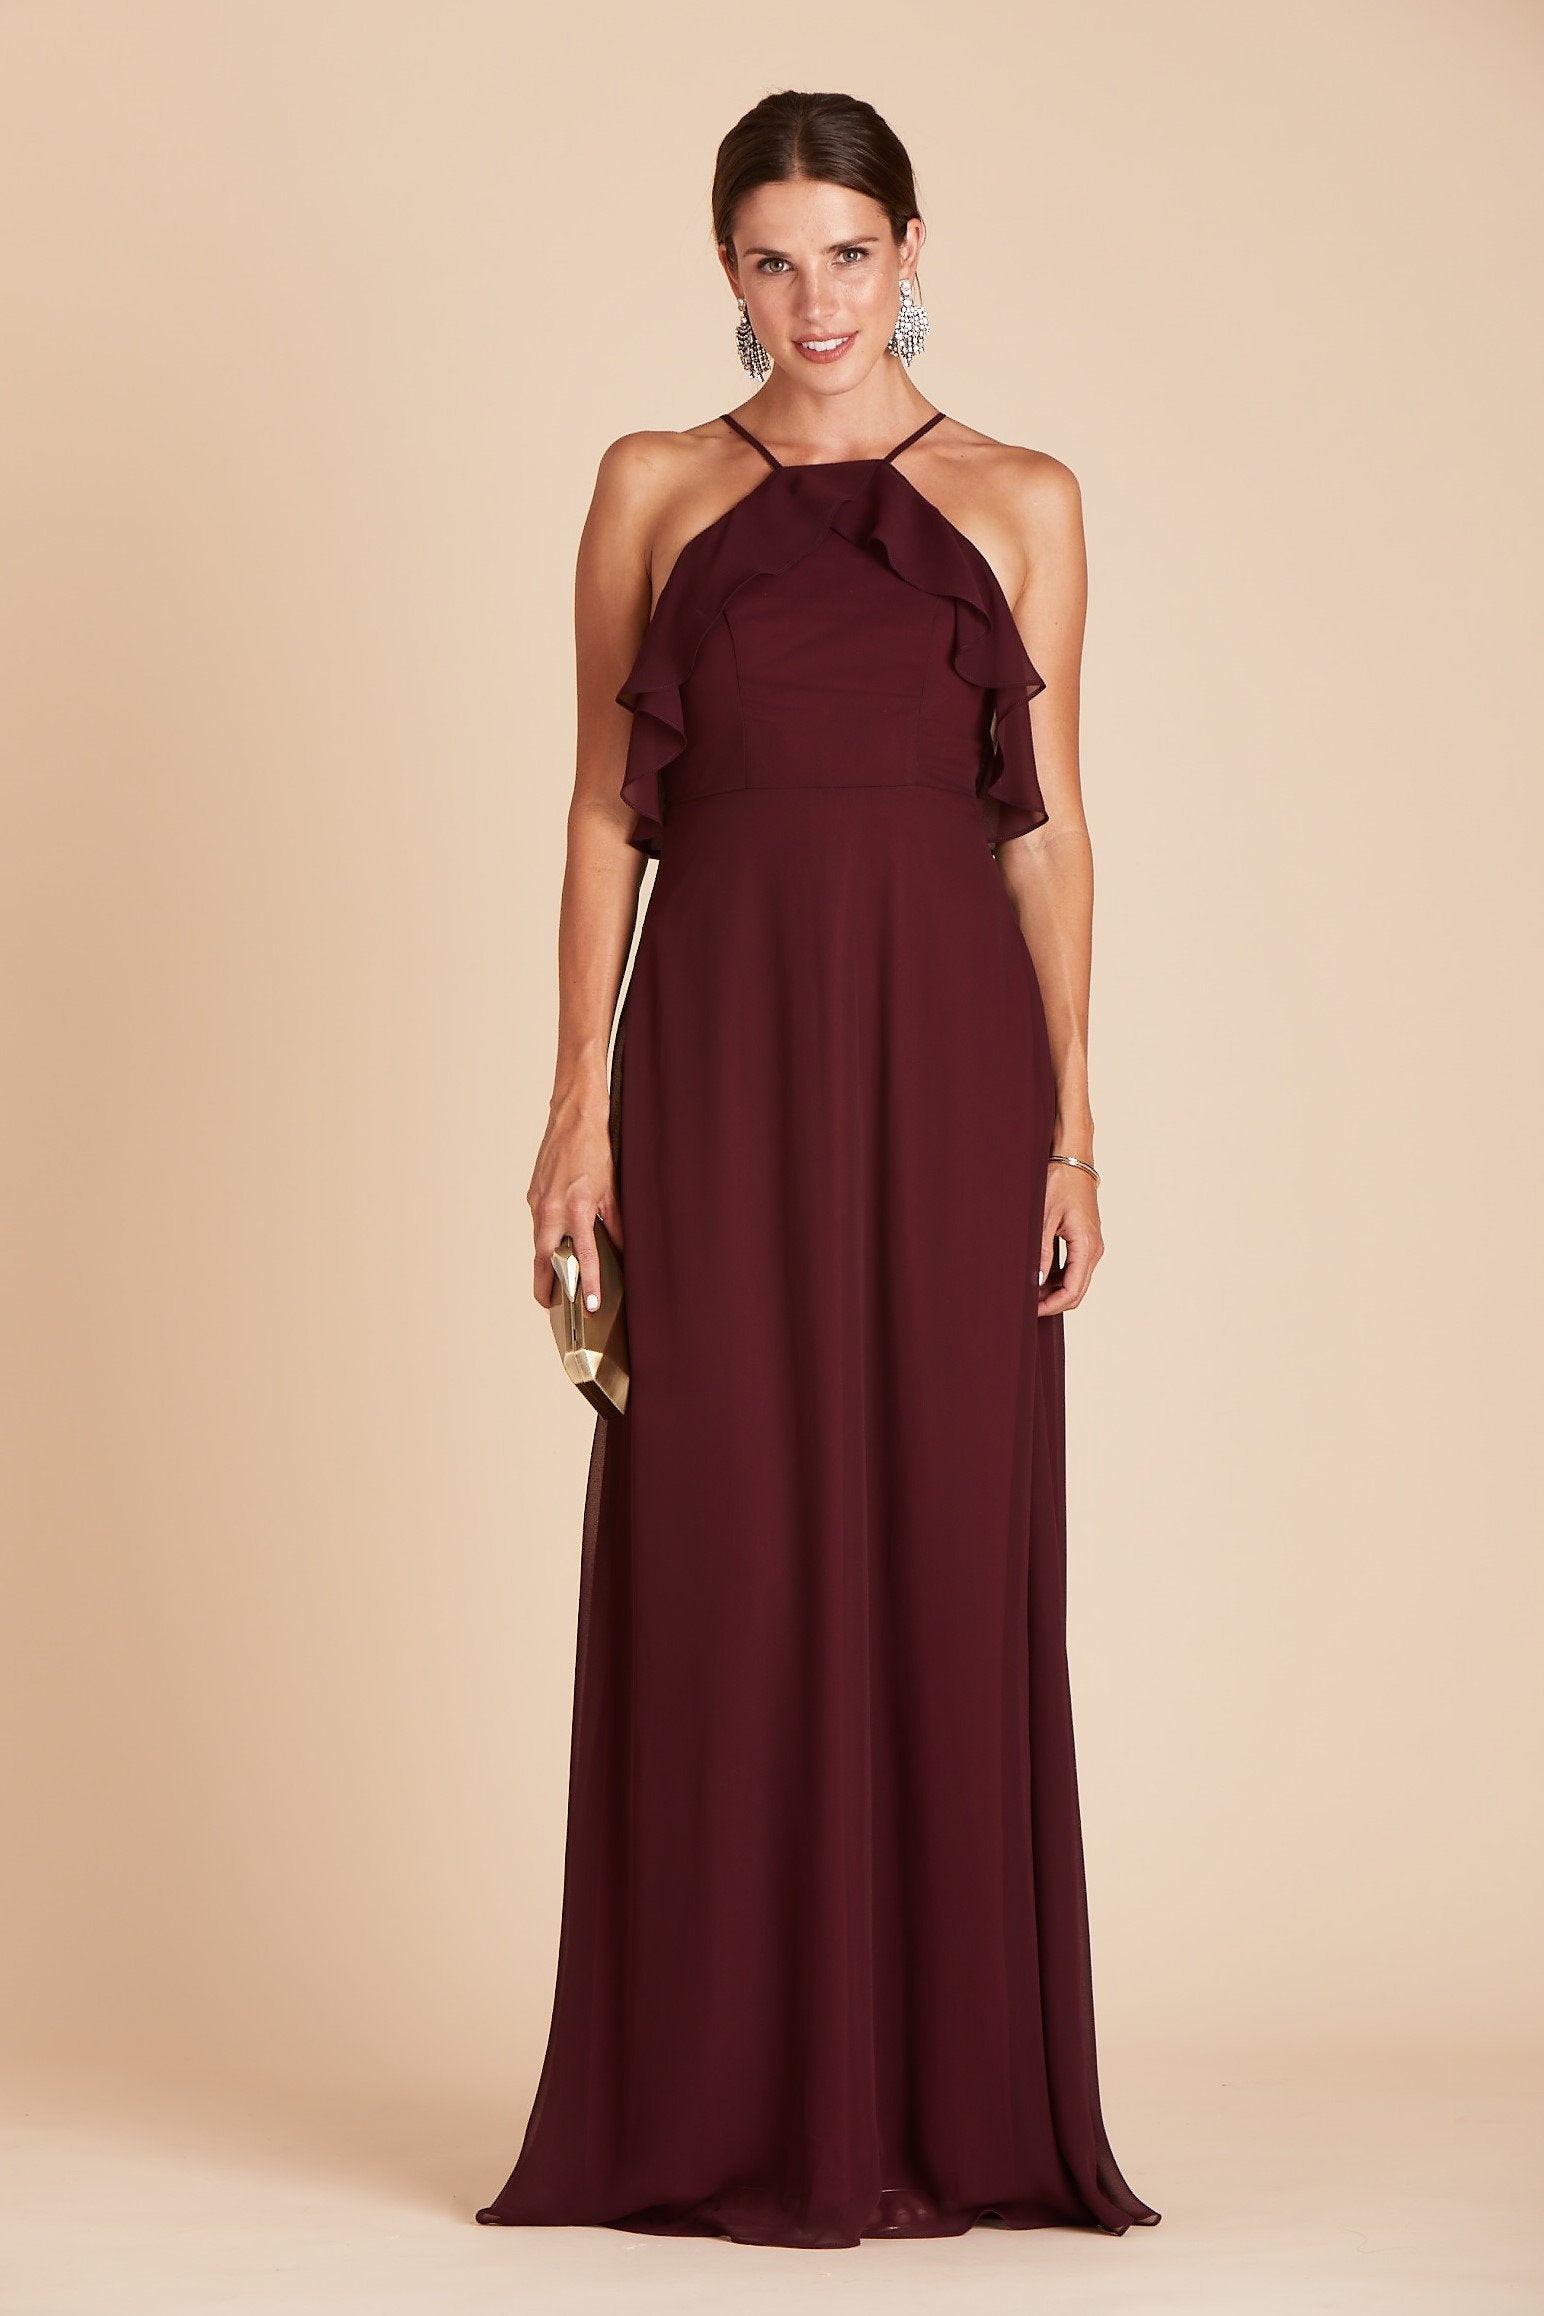 Jules bridesmaid dress in cabernet burgundy chiffon by Birdy Grey, front view